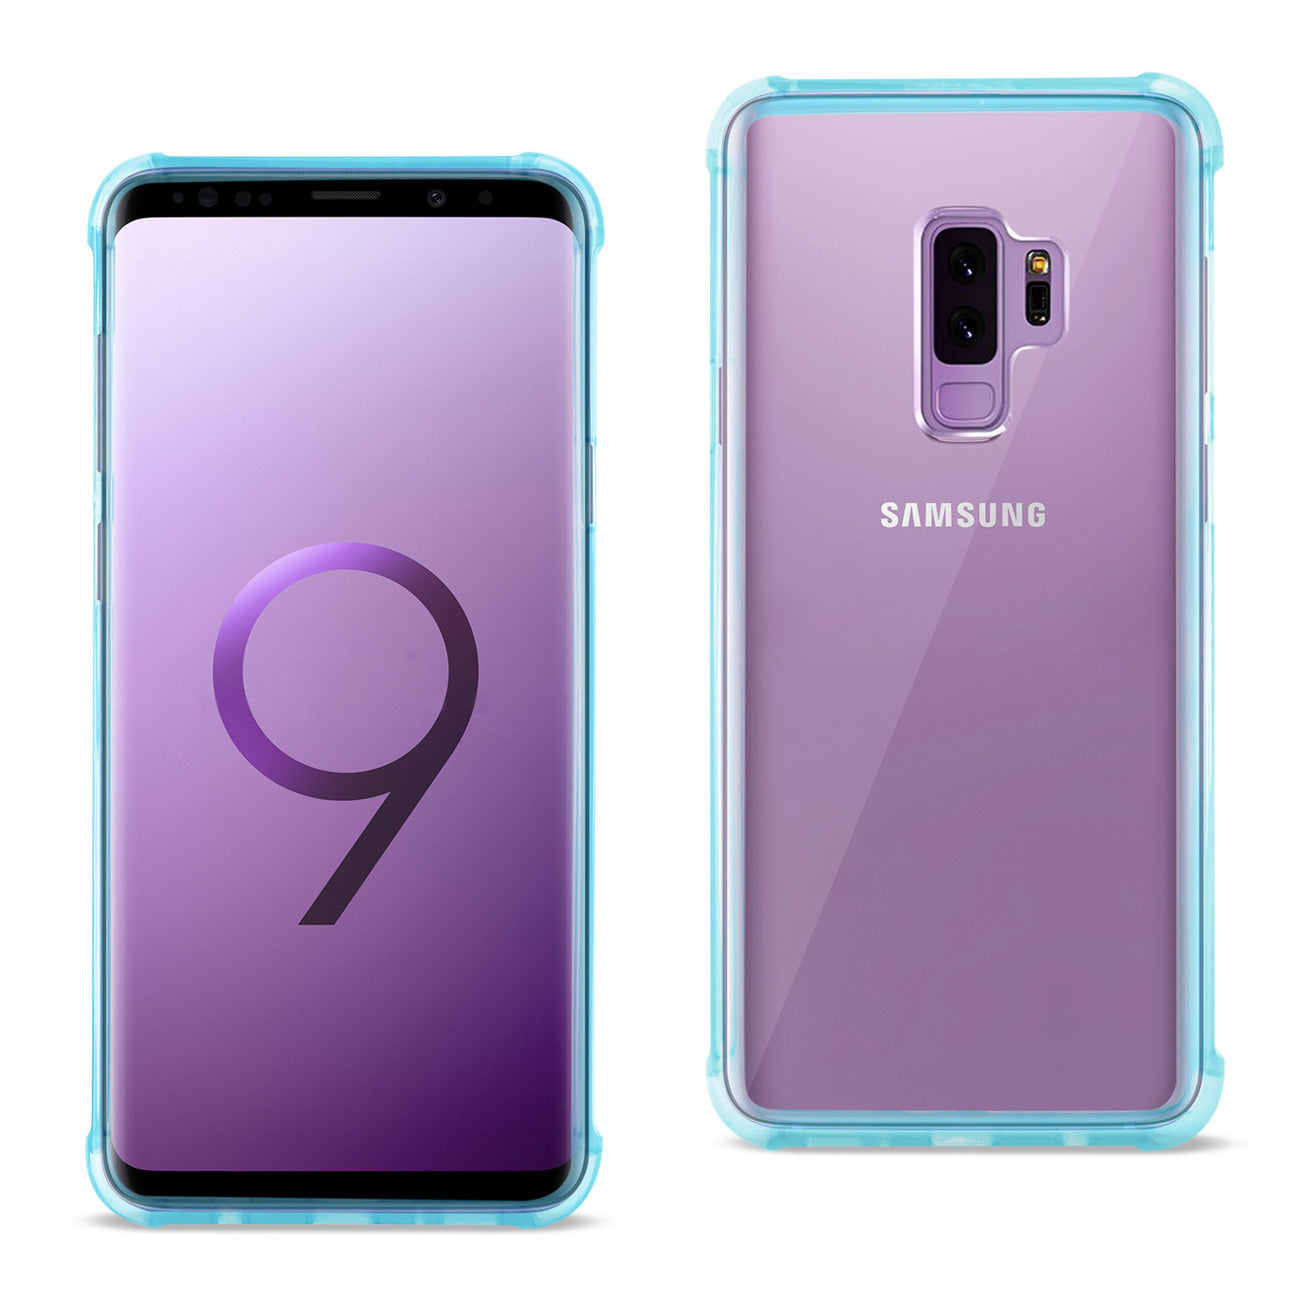 Samsung Galaxy S9 Plus Clear Bumper Case With Air Cushion Protection In Clear Navy